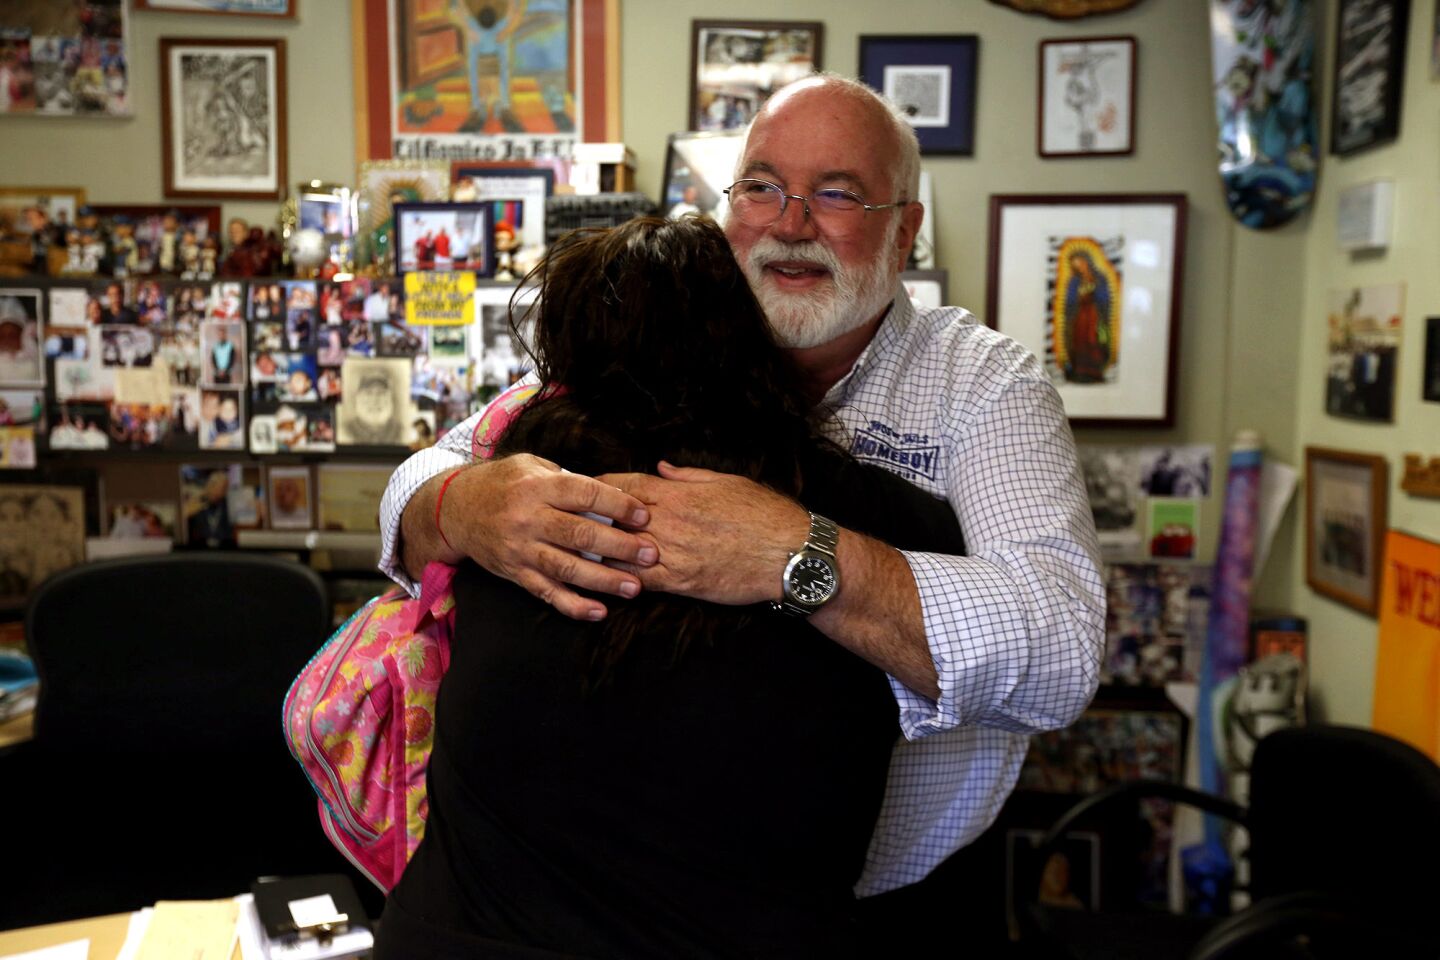 Father Gregory Boyle gives a hug to Maria Lozoya, 20, after she came by his office for advice.